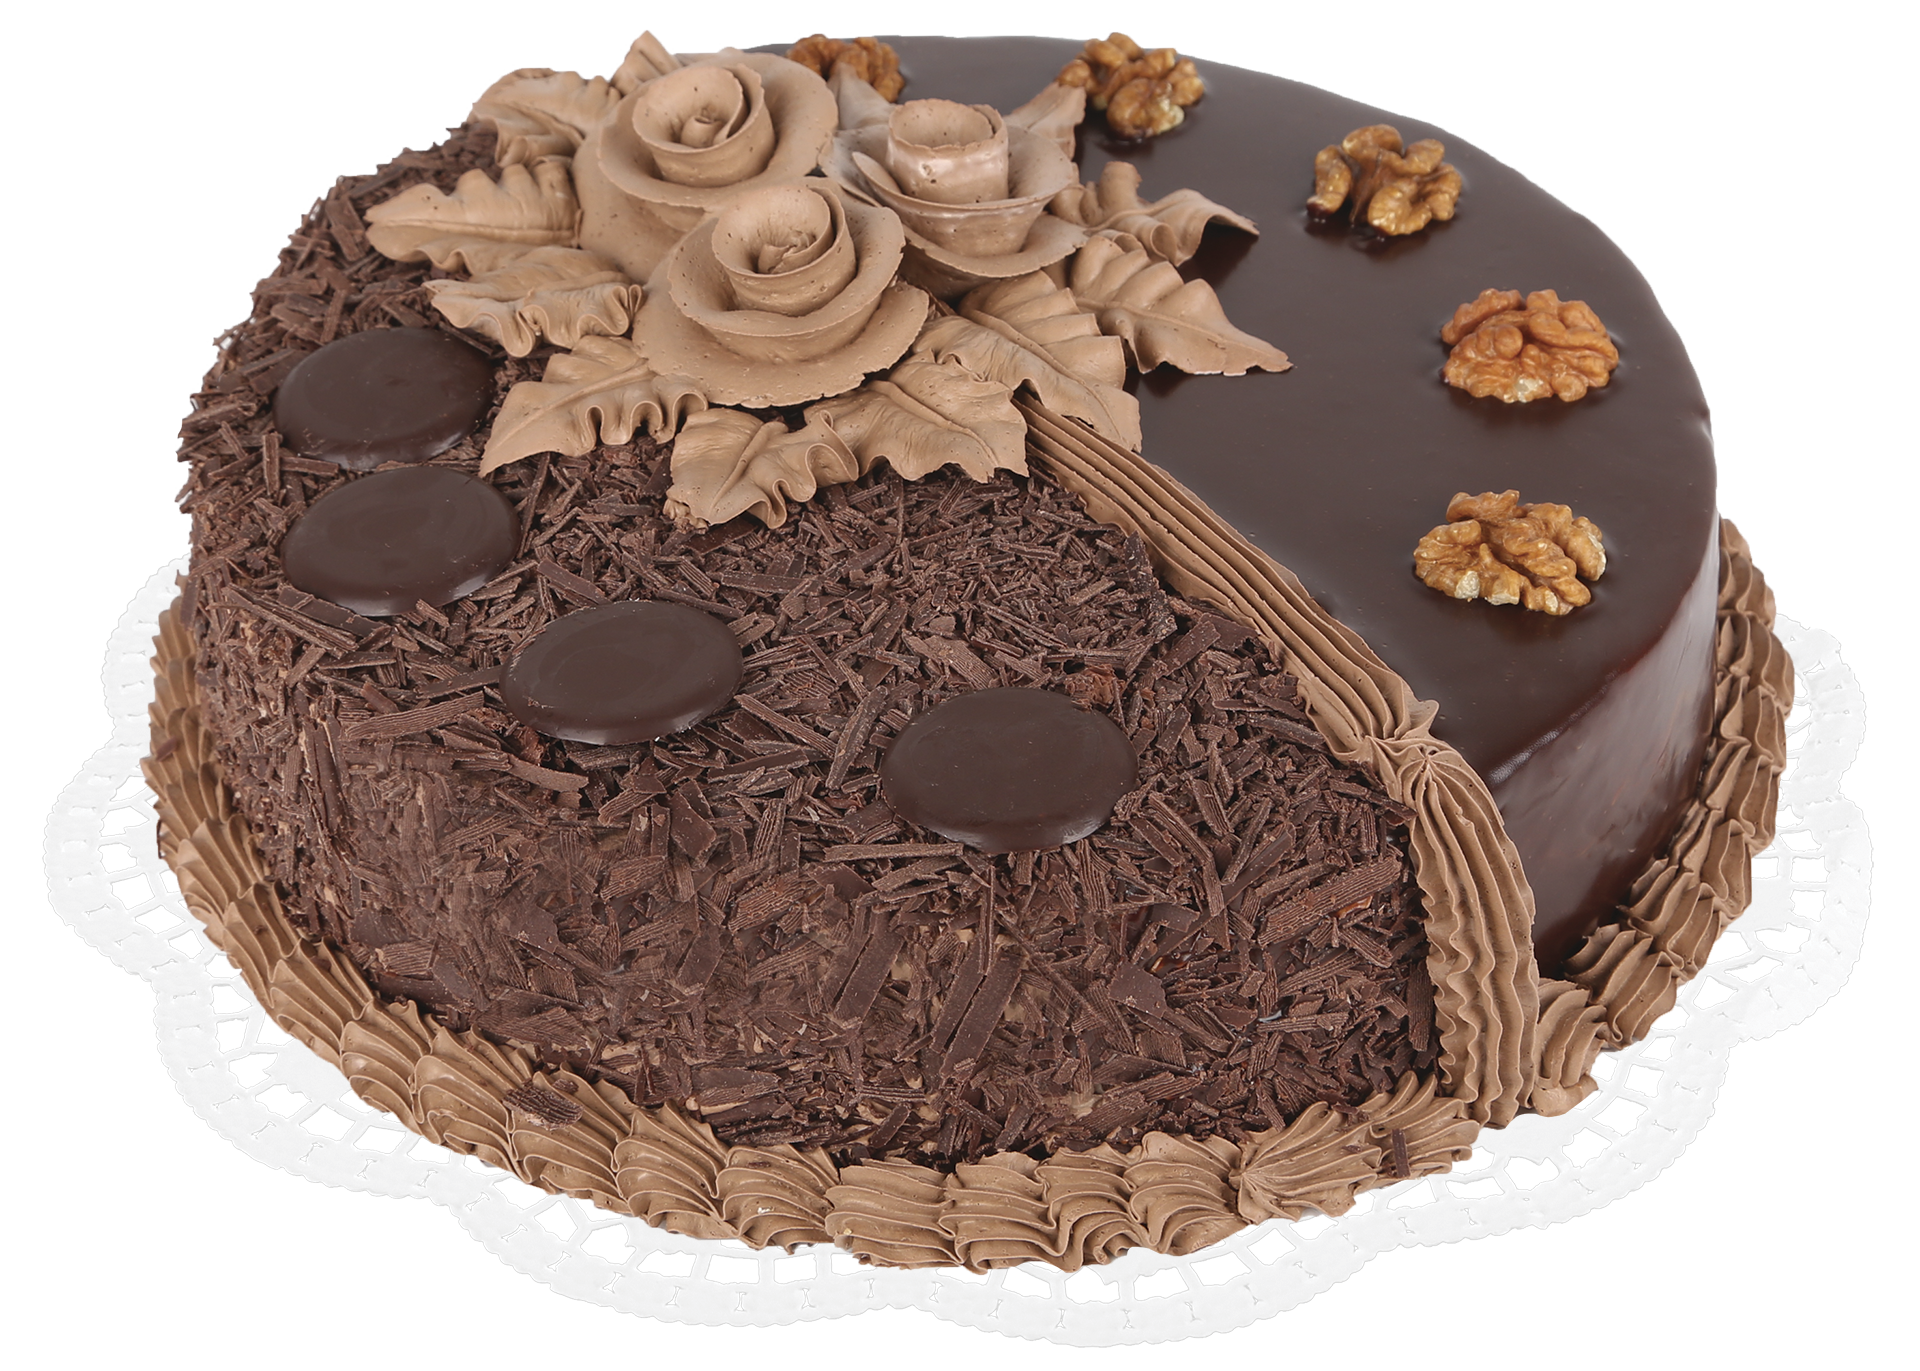 Aggregate 73+ 1 birthday cake png latest - awesomeenglish.edu.vn